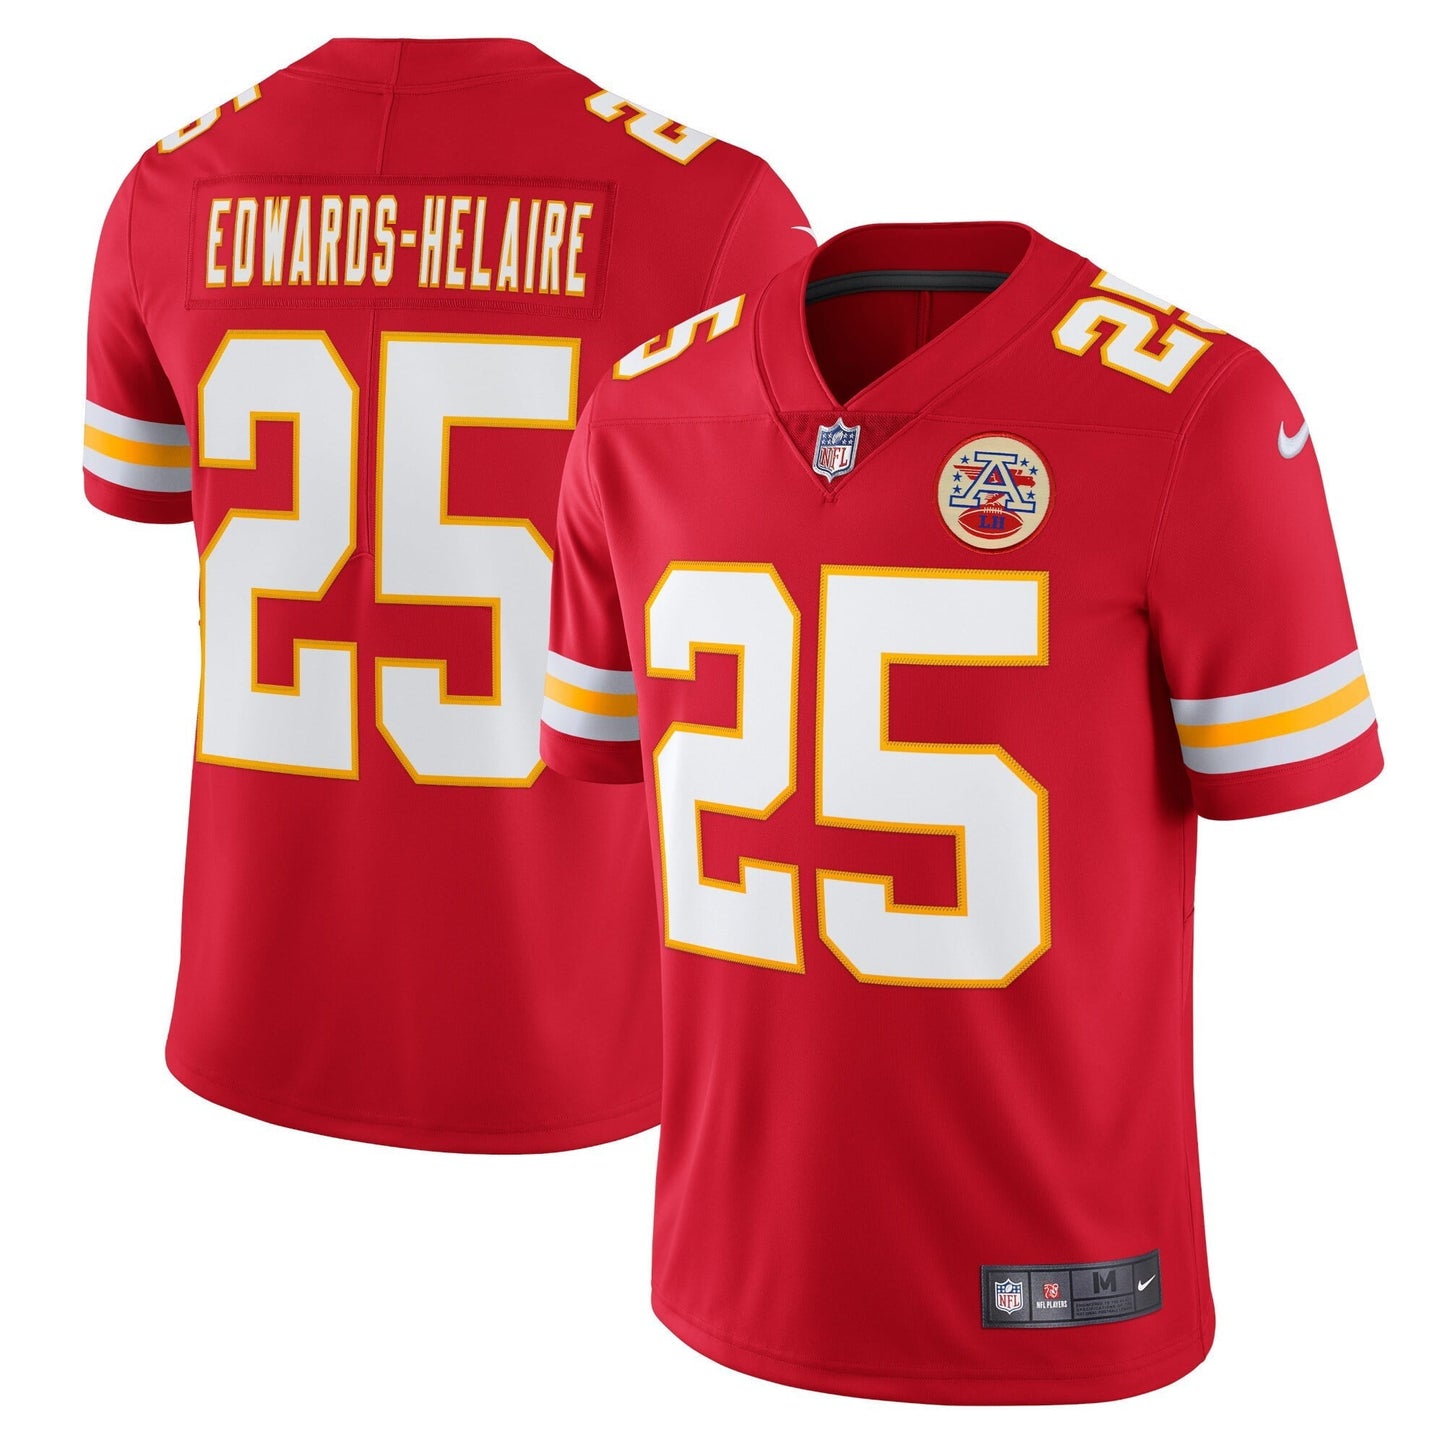 Men's Nike Clyde Edwards-Helaire Red Kansas City Chiefs Vapor Limited Jersey